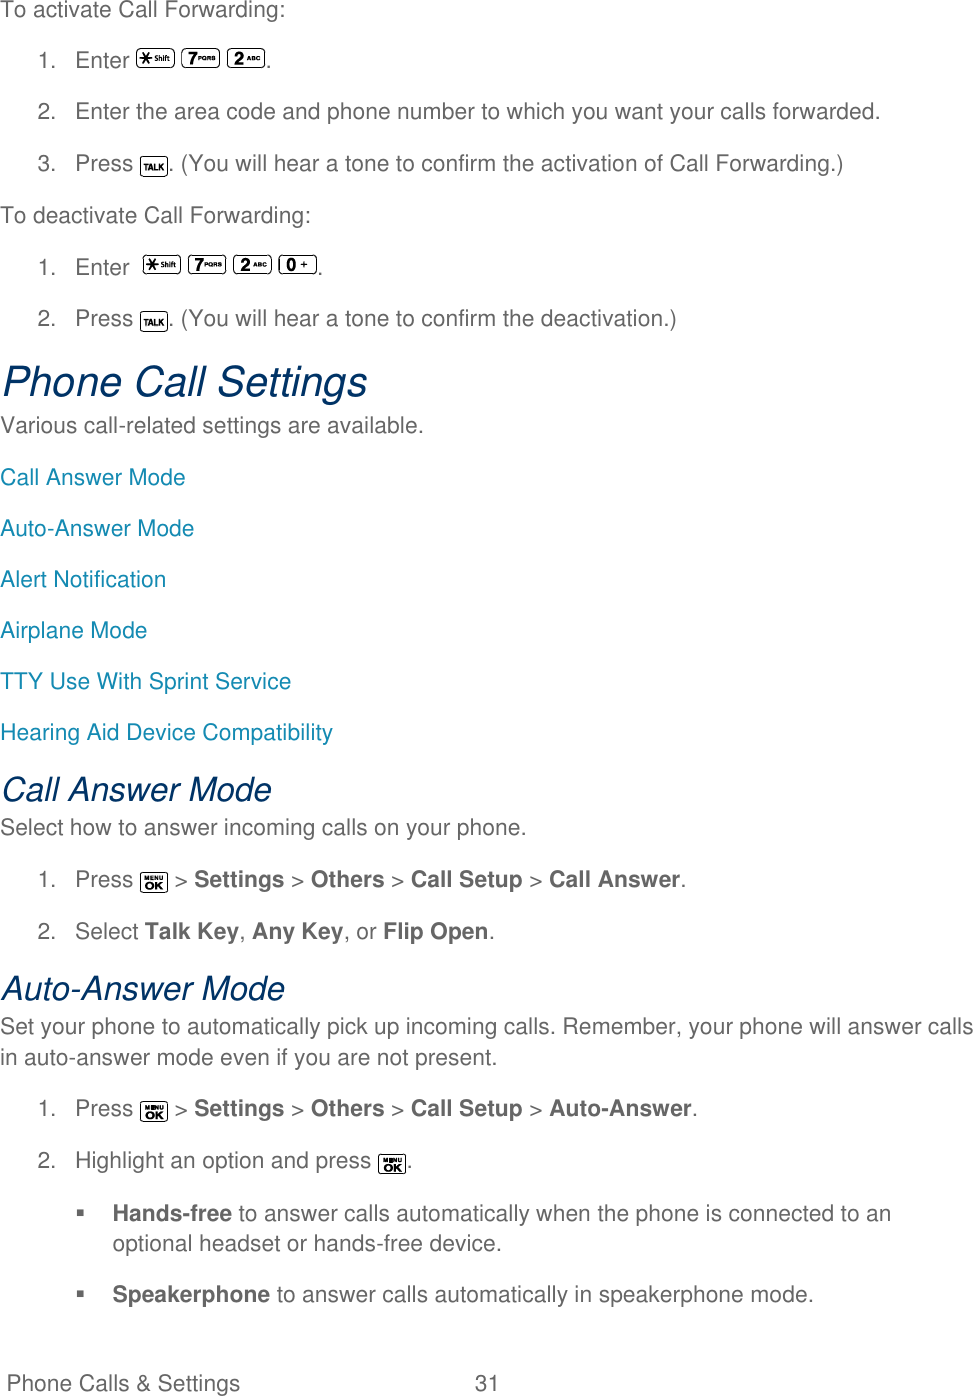   Phone Calls &amp; Settings  31   To activate Call Forwarding: 1.  Enter      . 2.  Enter the area code and phone number to which you want your calls forwarded. 3.  Press  . (You will hear a tone to confirm the activation of Call Forwarding.) To deactivate Call Forwarding: 1.  Enter         . 2.  Press  . (You will hear a tone to confirm the deactivation.) Phone Call Settings Various call-related settings are available. Call Answer Mode Auto-Answer Mode Alert Notification Airplane Mode TTY Use With Sprint Service Hearing Aid Device Compatibility Call Answer Mode Select how to answer incoming calls on your phone. 1.  Press   &gt; Settings &gt; Others &gt; Call Setup &gt; Call Answer. 2.  Select Talk Key, Any Key, or Flip Open. Auto-Answer Mode Set your phone to automatically pick up incoming calls. Remember, your phone will answer calls in auto-answer mode even if you are not present. 1.  Press   &gt; Settings &gt; Others &gt; Call Setup &gt; Auto-Answer. 2.  Highlight an option and press  .  Hands-free to answer calls automatically when the phone is connected to an optional headset or hands-free device.  Speakerphone to answer calls automatically in speakerphone mode. 